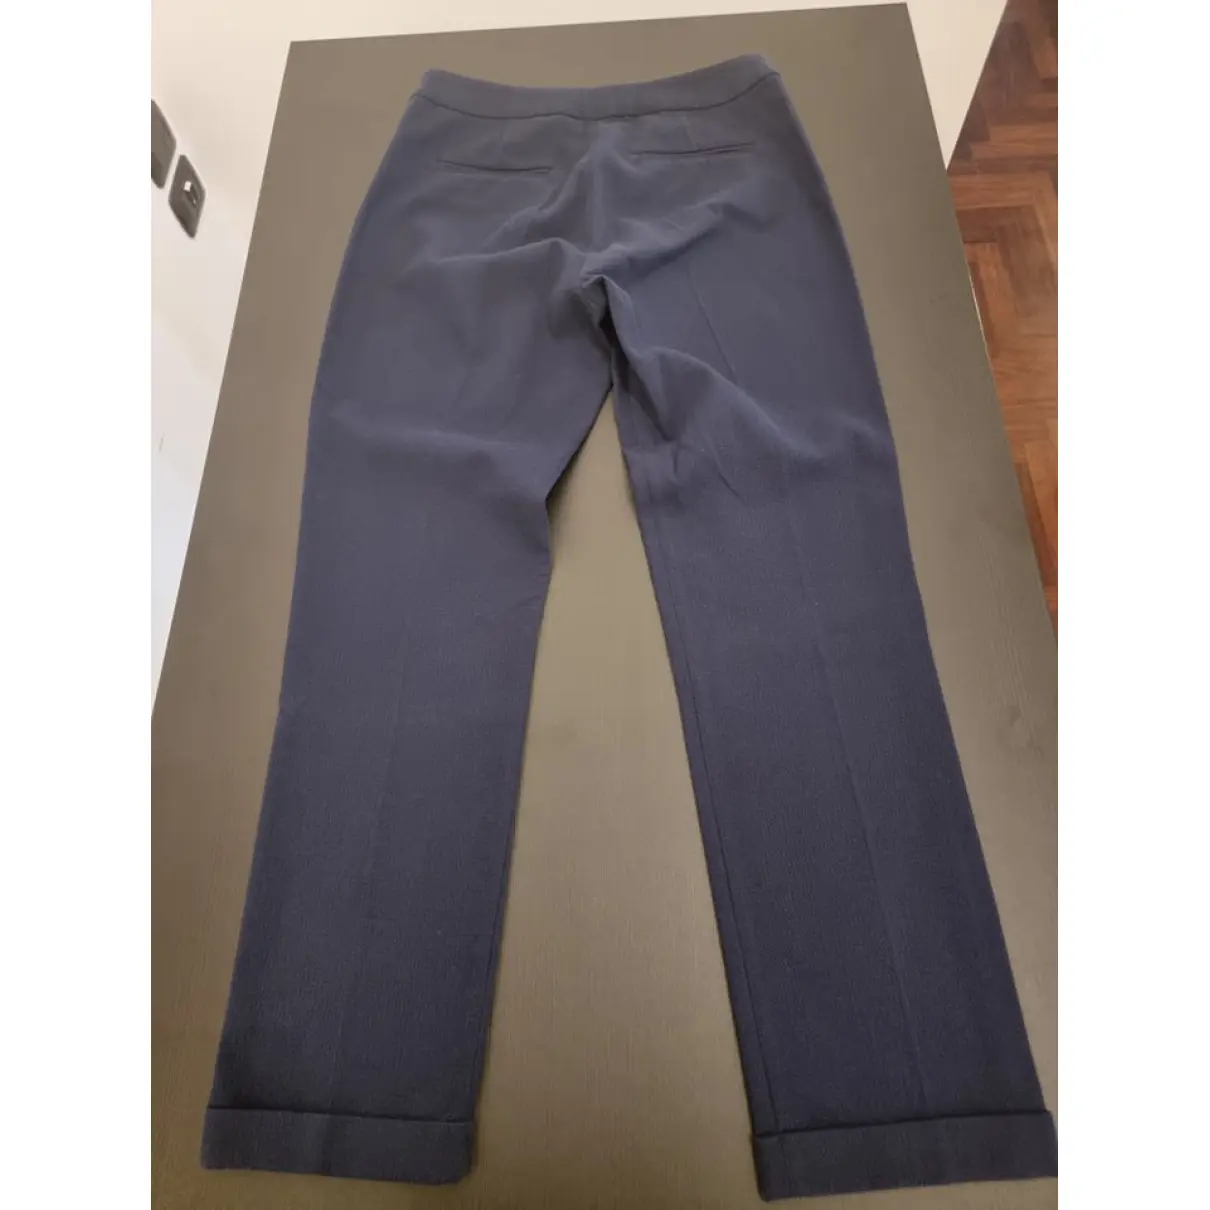 Buy Max & Co Straight pants online